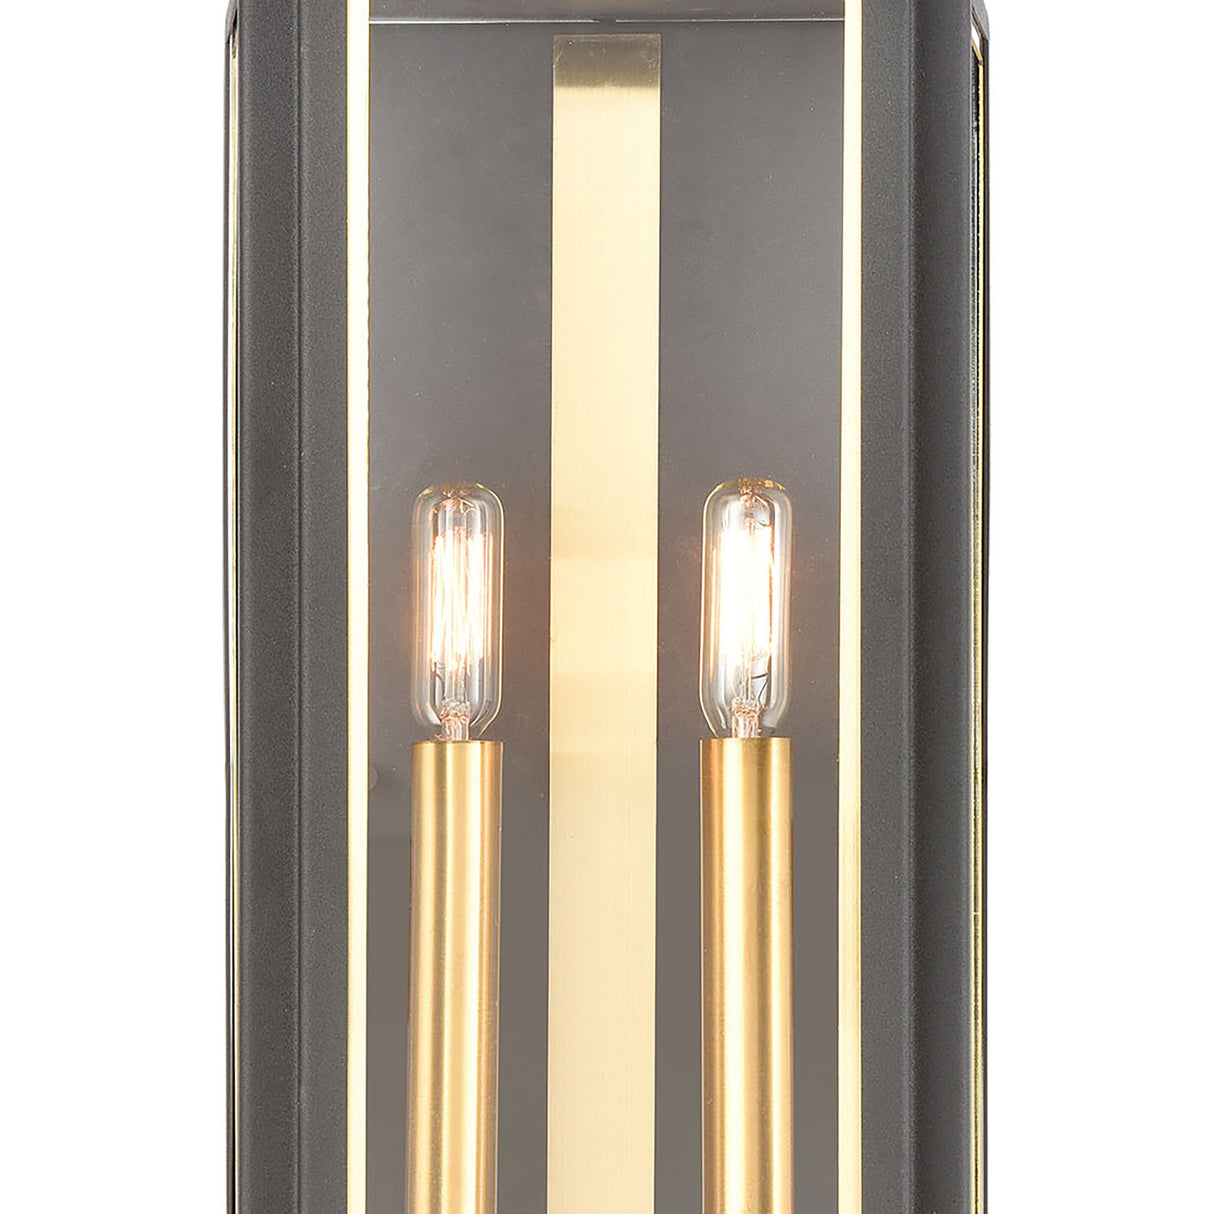 Elk 46741/2 Portico 21'' High 2-Light Outdoor Sconce - Charcoal